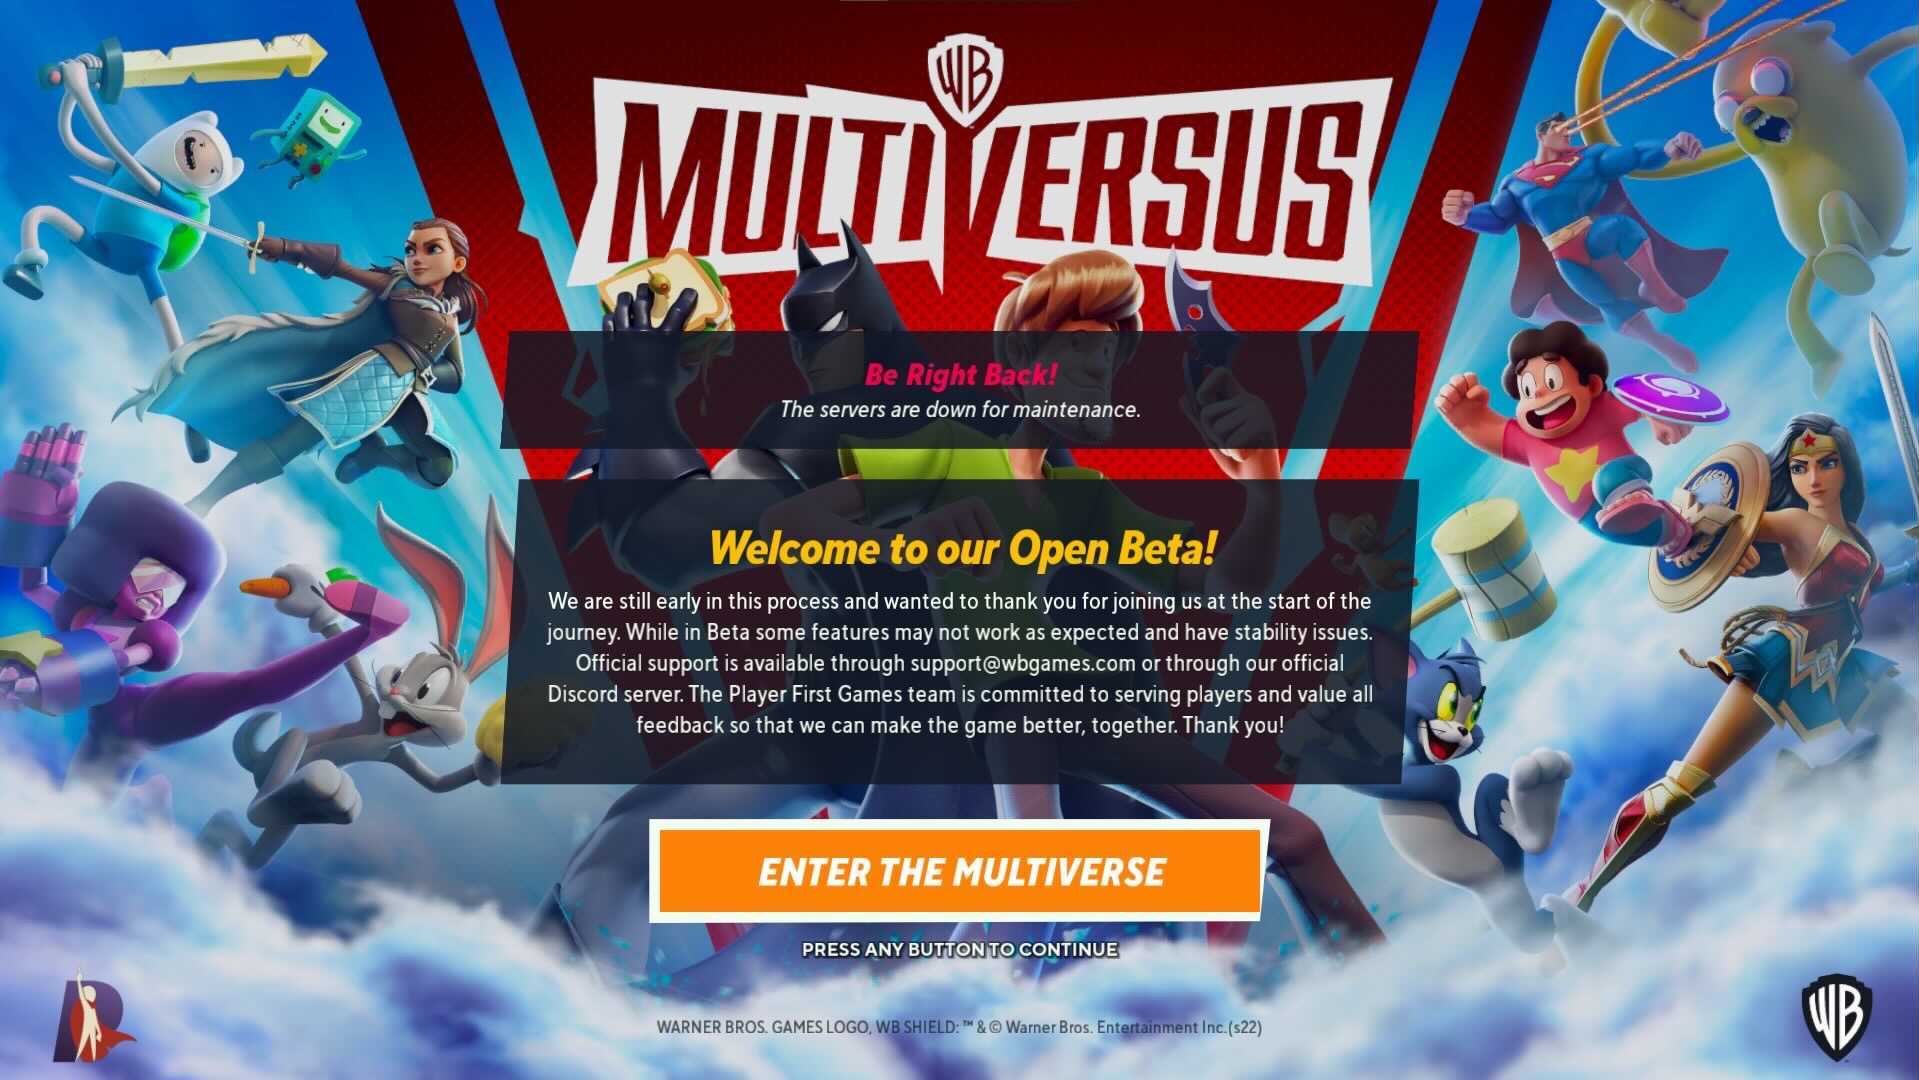 How To Create A WB GAMES Account For MULTIVERSUS working 